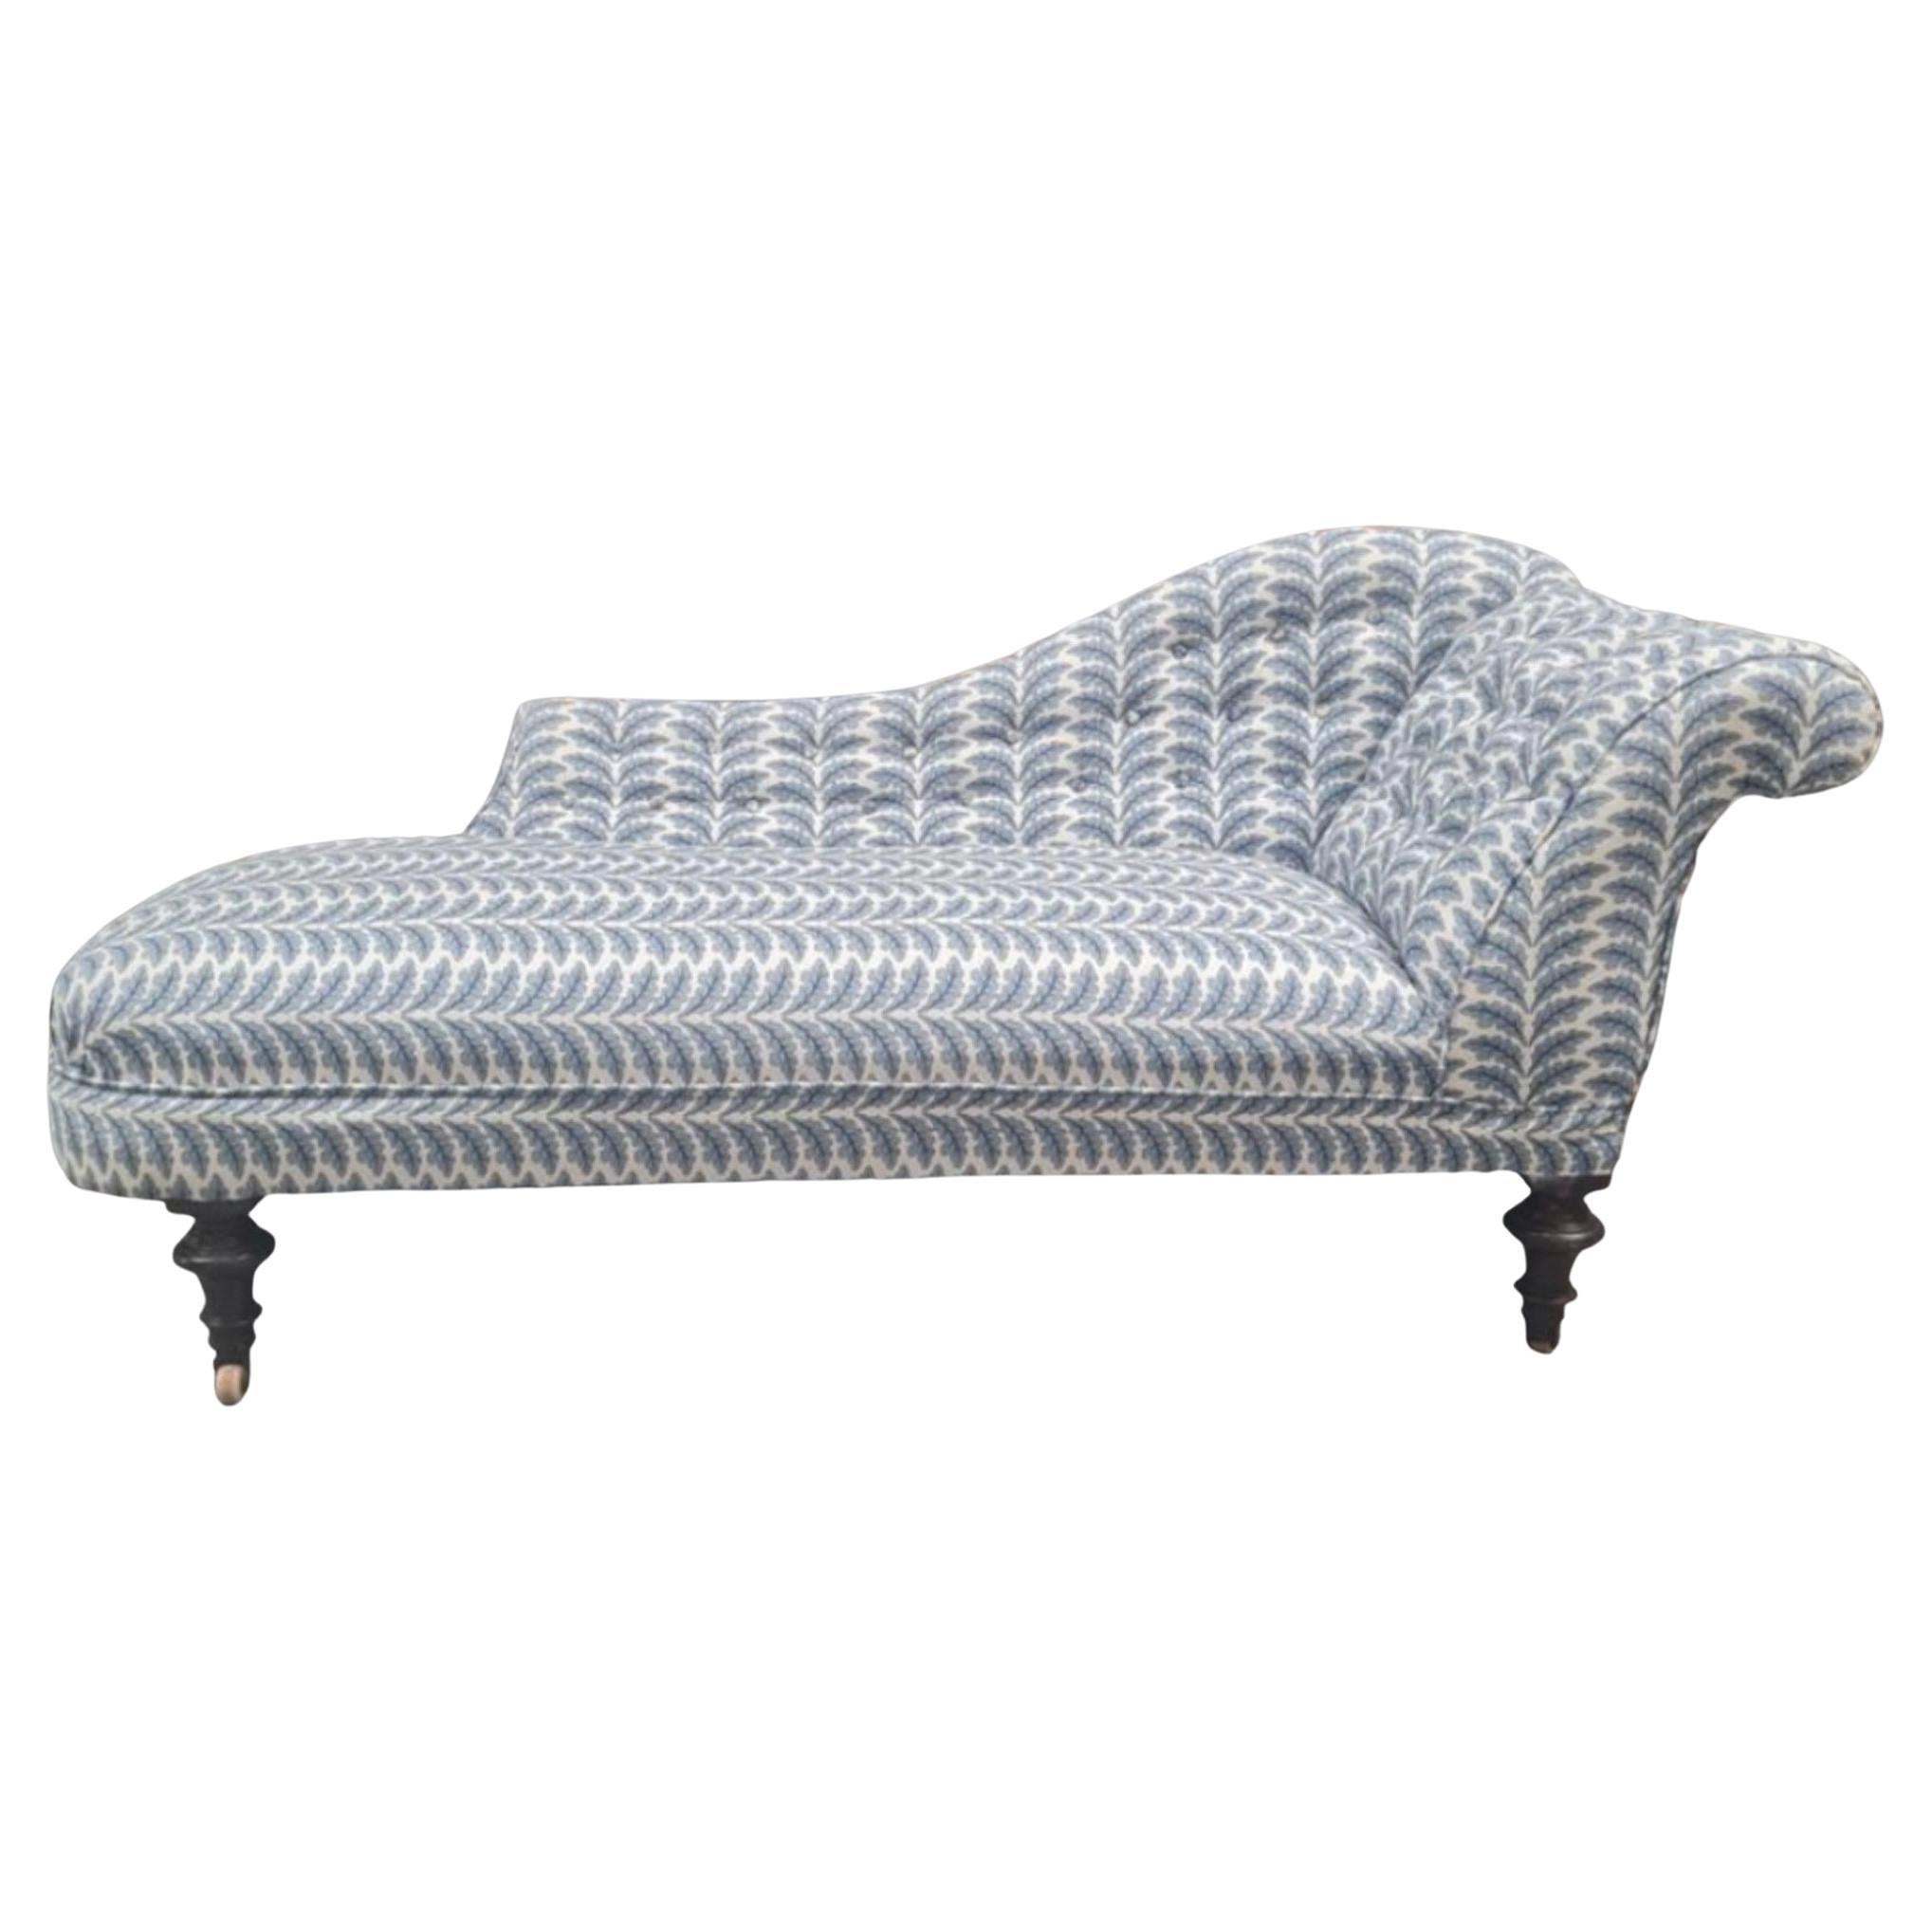 Attractive Victorian Chaise Lounge